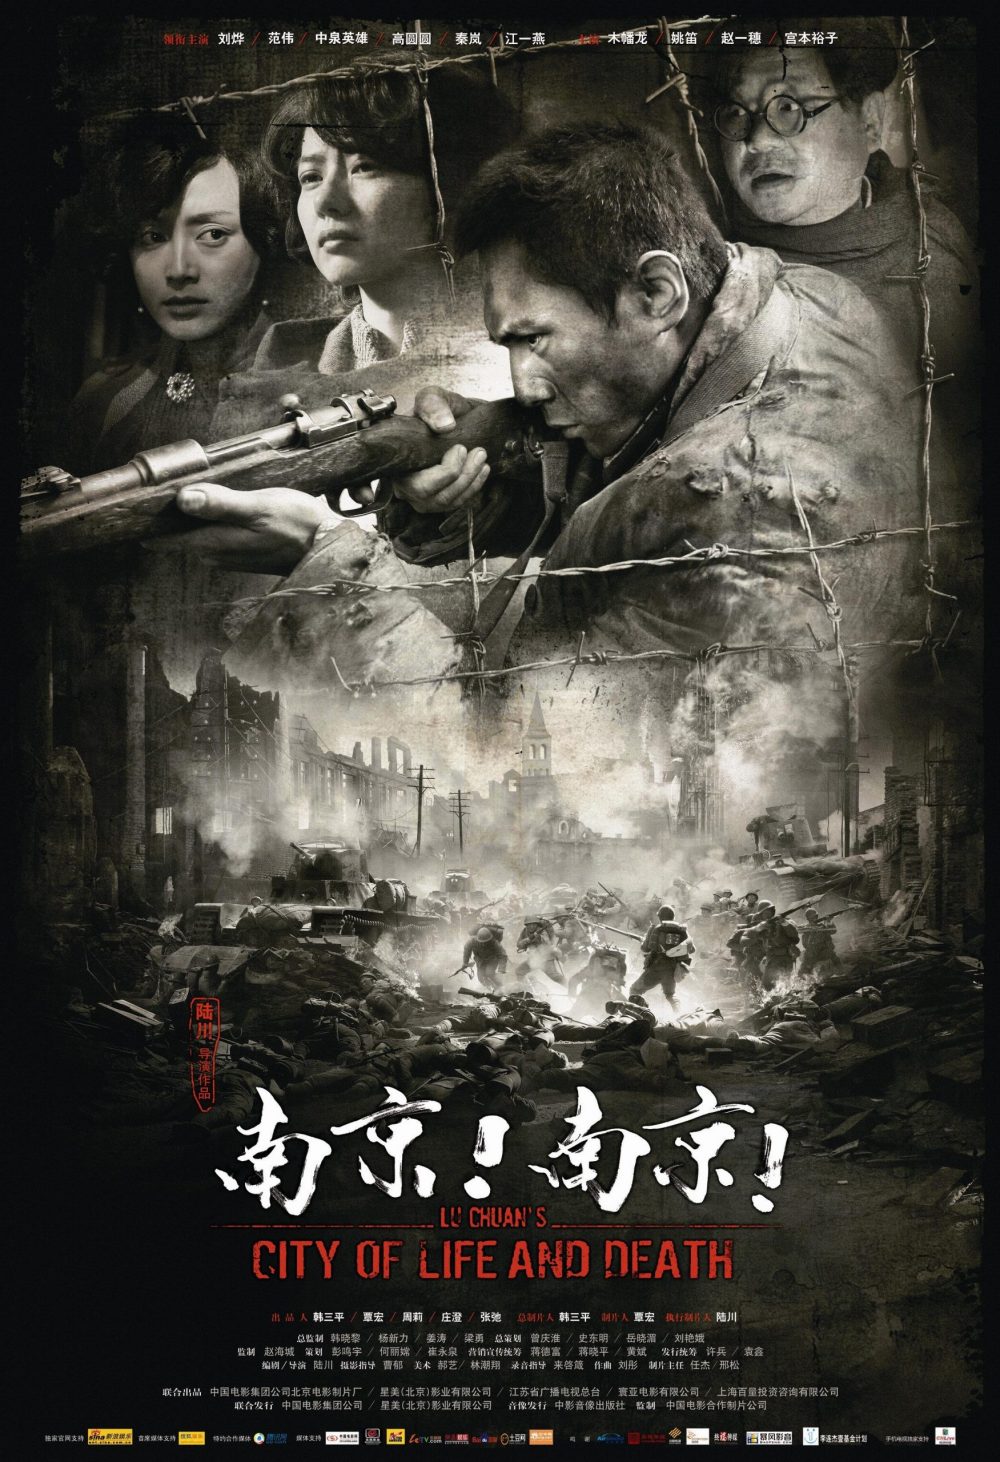 Phim Trung Quốc chống Nhật: Nam Kinh! Nam Kinh! - City of Life and Death (2009)